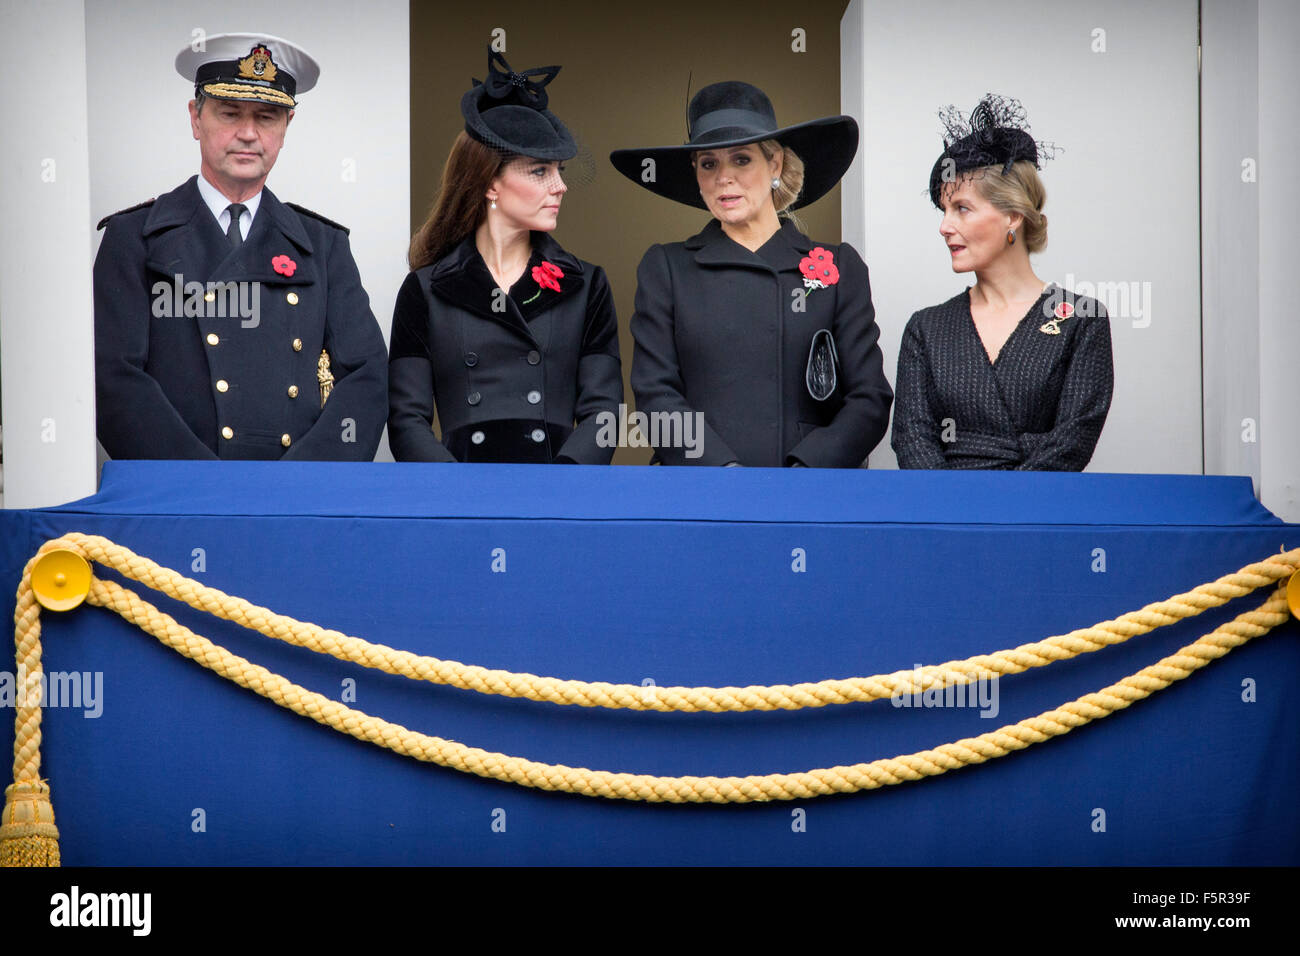 Britain's Catherine the Duchess of Cambridge (2nd L) stands alongside Queen Maxima of the Netherlands (2nd R), Sophie, Duchess of Wessex, and Vice Admiral Sir Timothy Laurence at the Remembrance Sunday ceremony at the Cenotaph in London, Britain, 08 November2015. Britain observed the annual Remembrance Day on 08 November, in memory of the war dead. Photo: Patrick van Katwijk/ POINT DE VUE OUT - NO WIRE SERVICE - Stock Photo